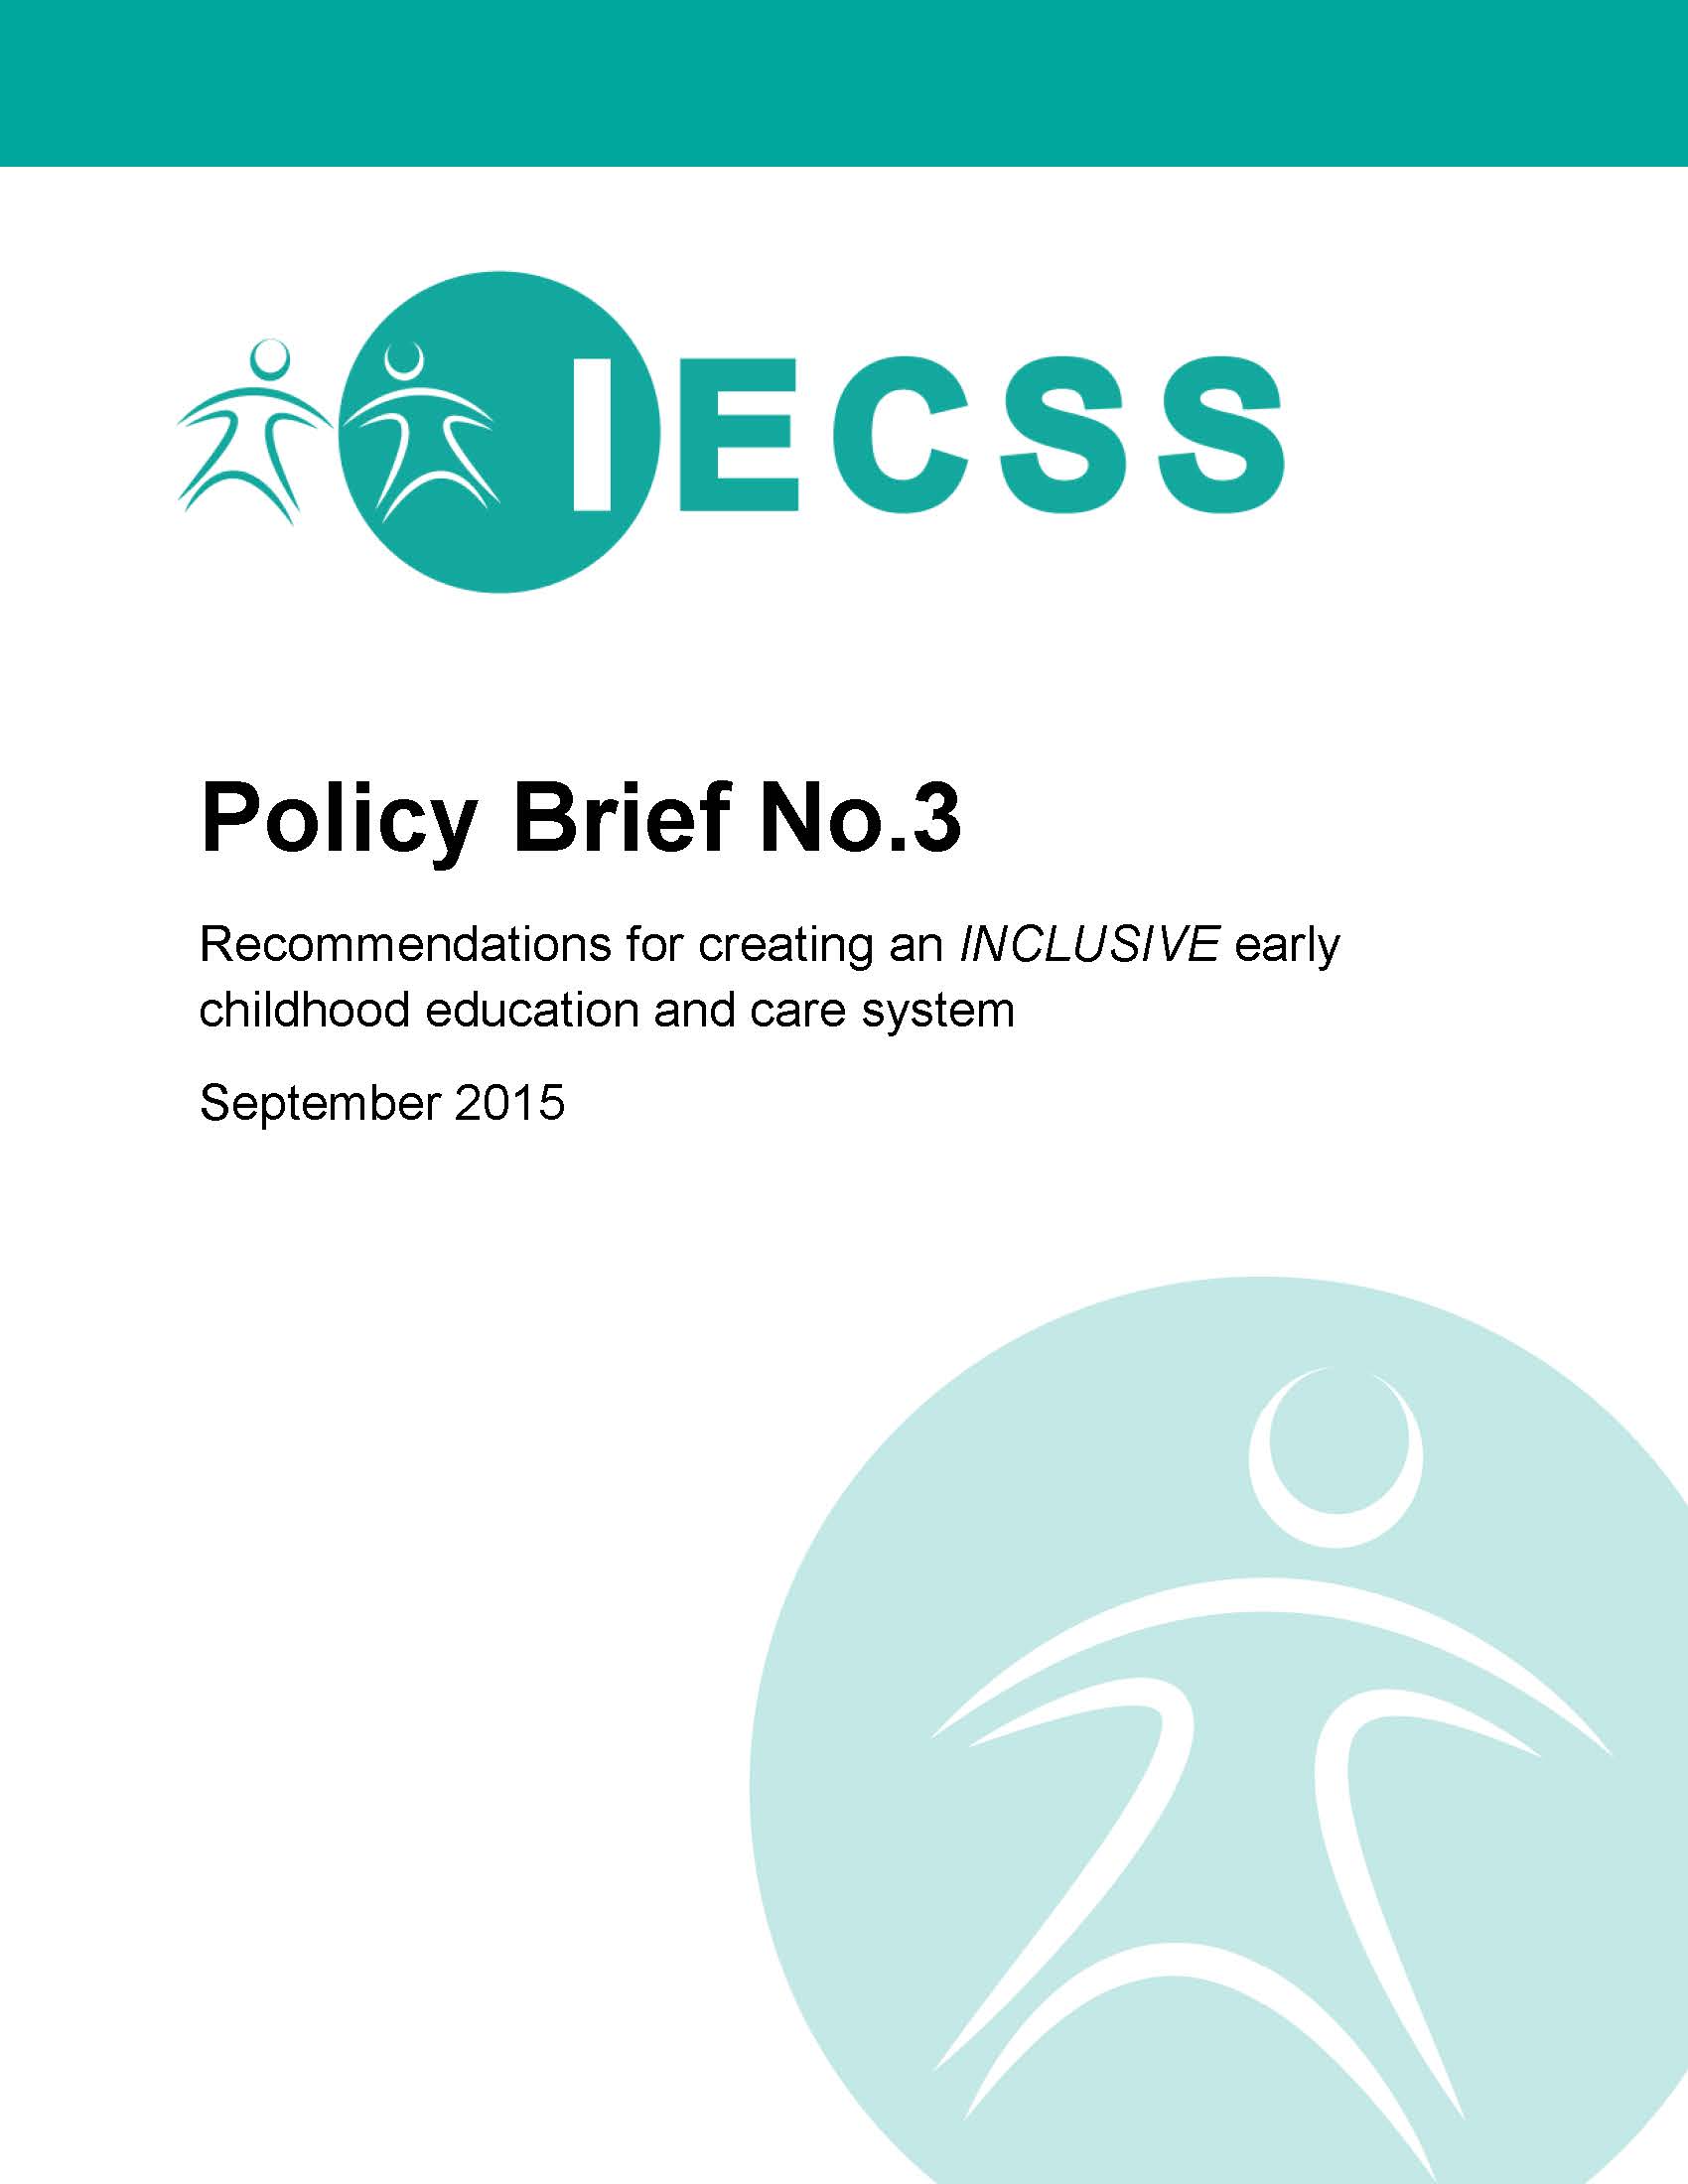 Recommendations for creating an Inclusive early childhood education and care system